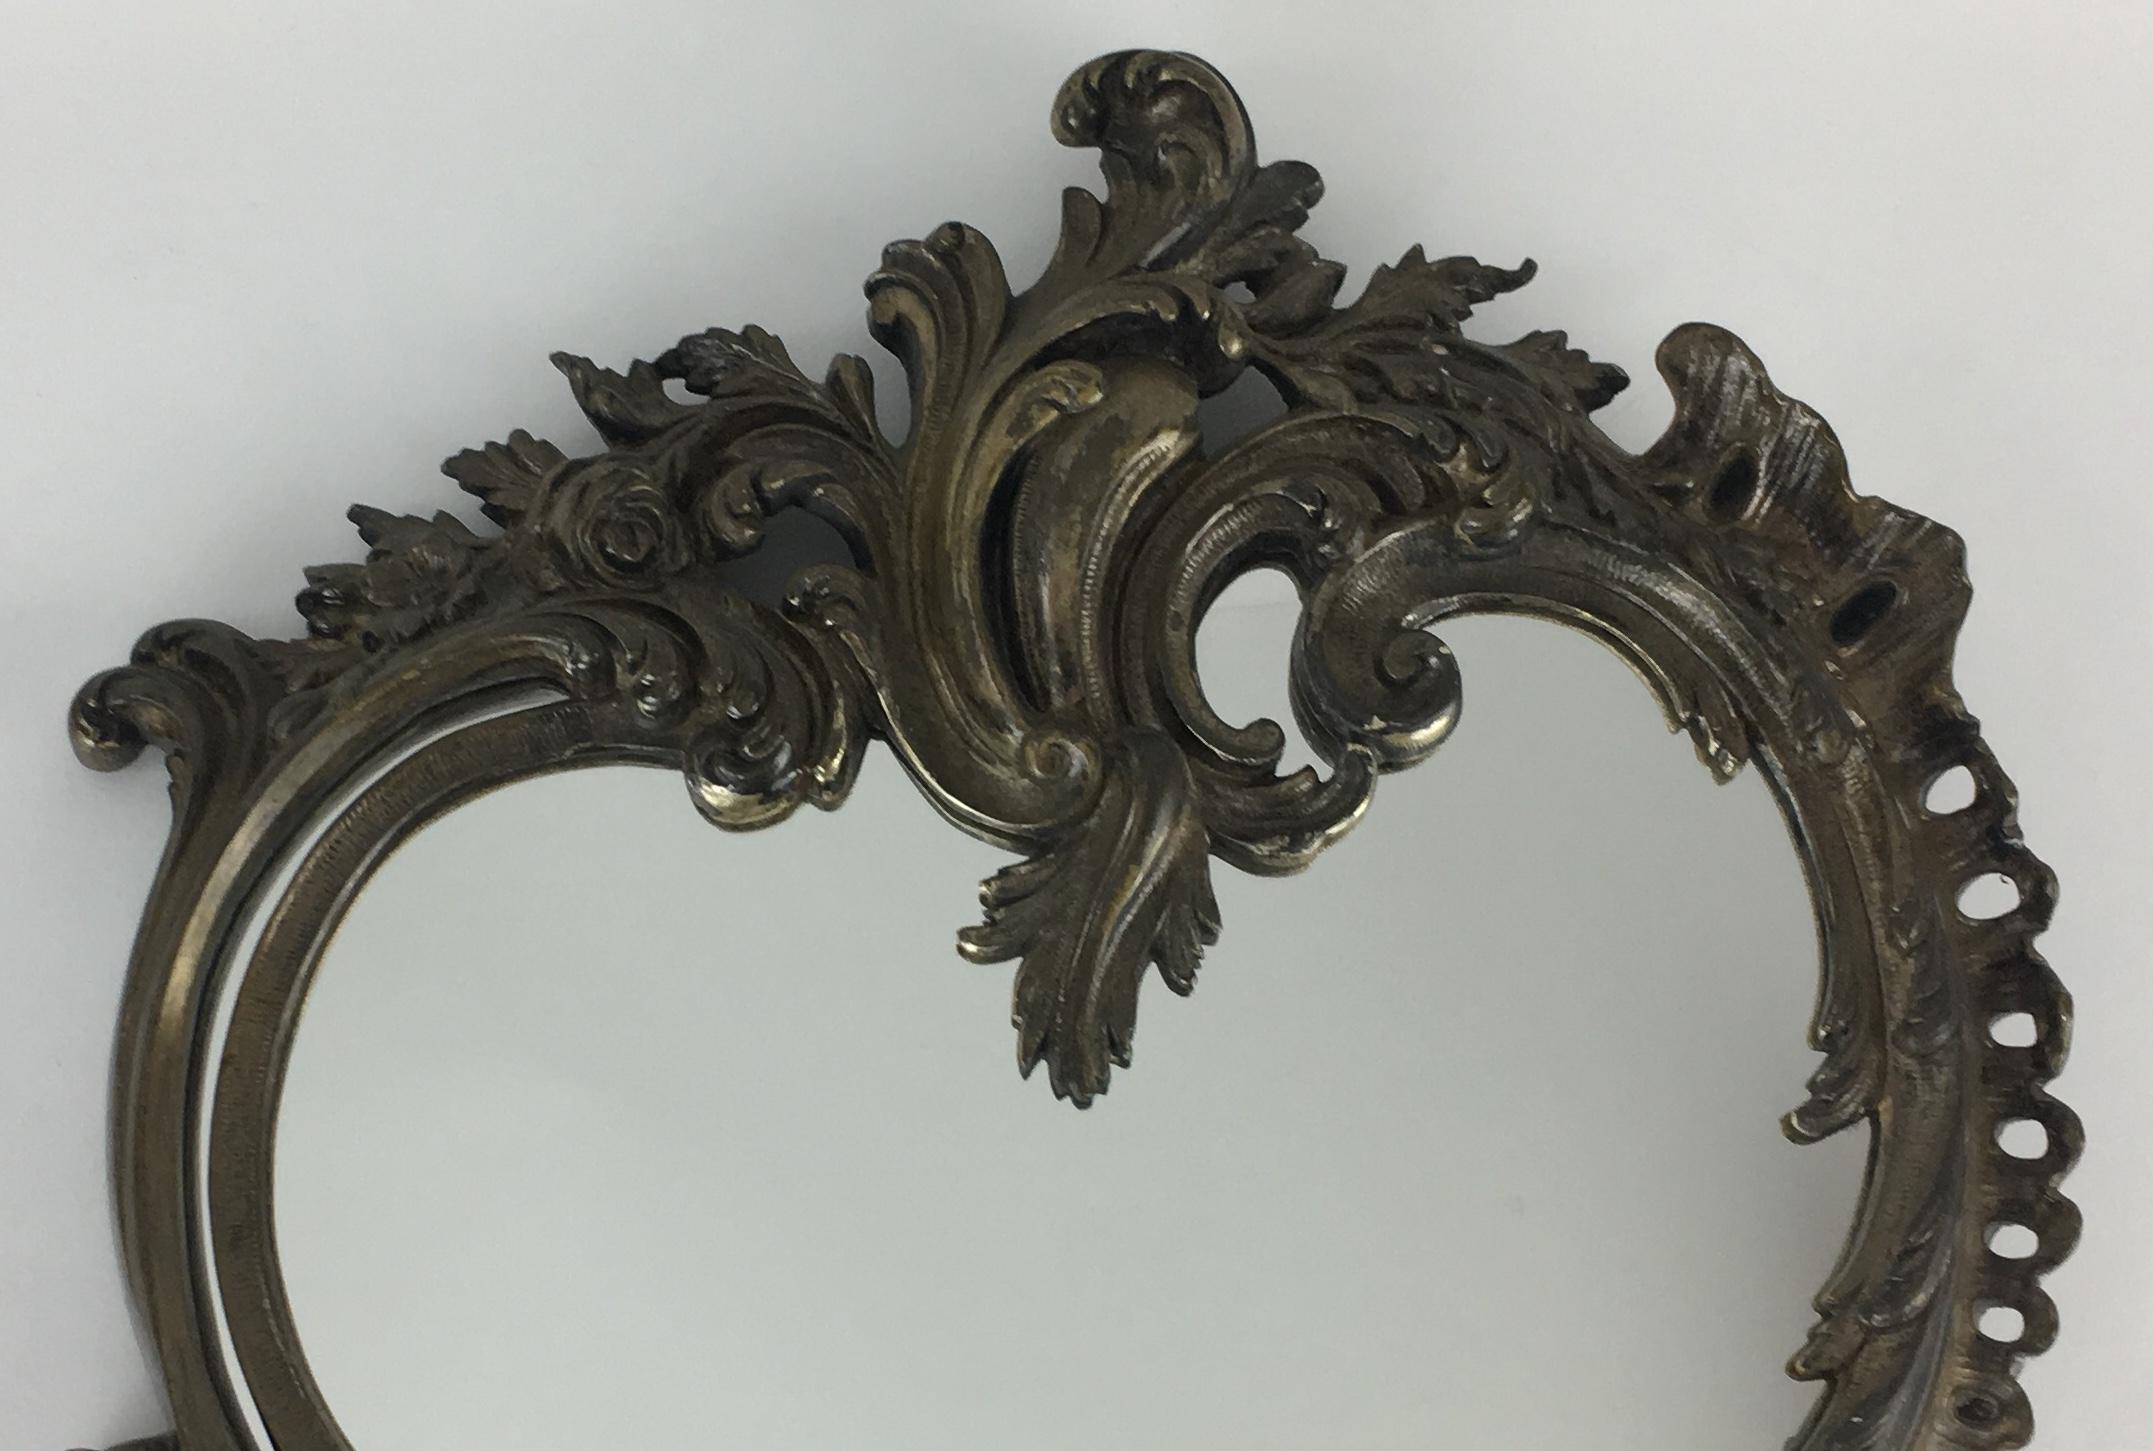 Napoleon III style violin shaped table mirror made of bronze with a silvered rocaille decor of scrolled acanthus leaves, small flowers and on the bottom left a Mythological animal called 